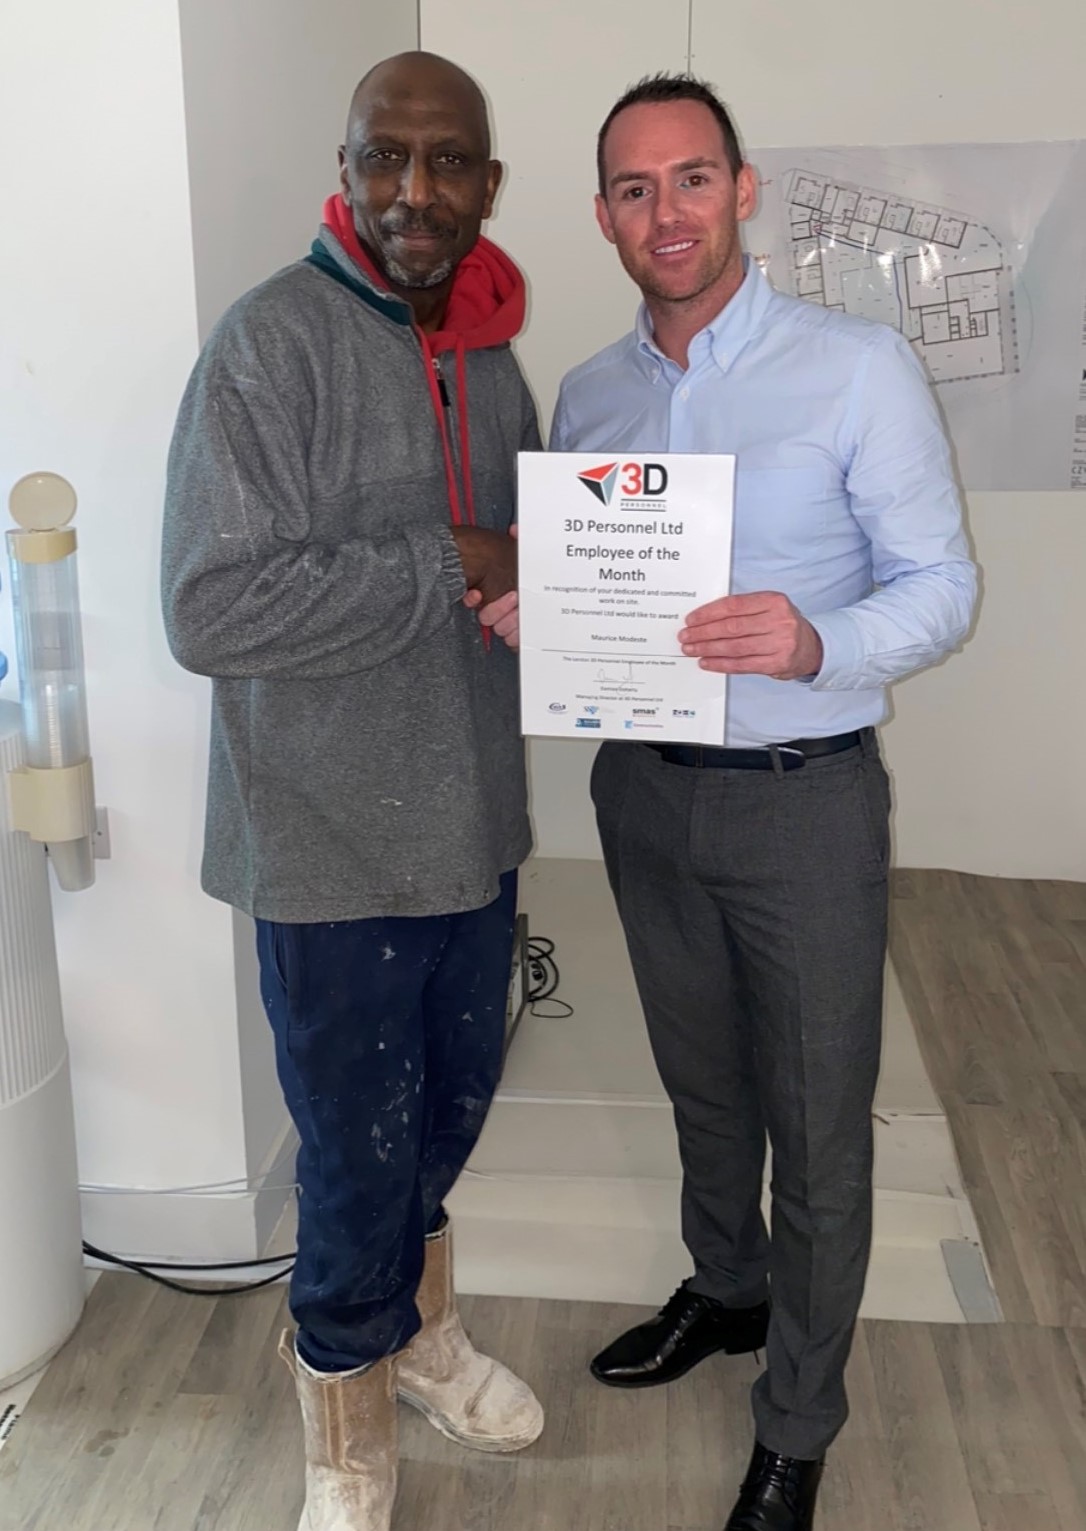 Maurice Modeste is presented with his 3D Employee of the Month award by Sales Director Ciaran Greene